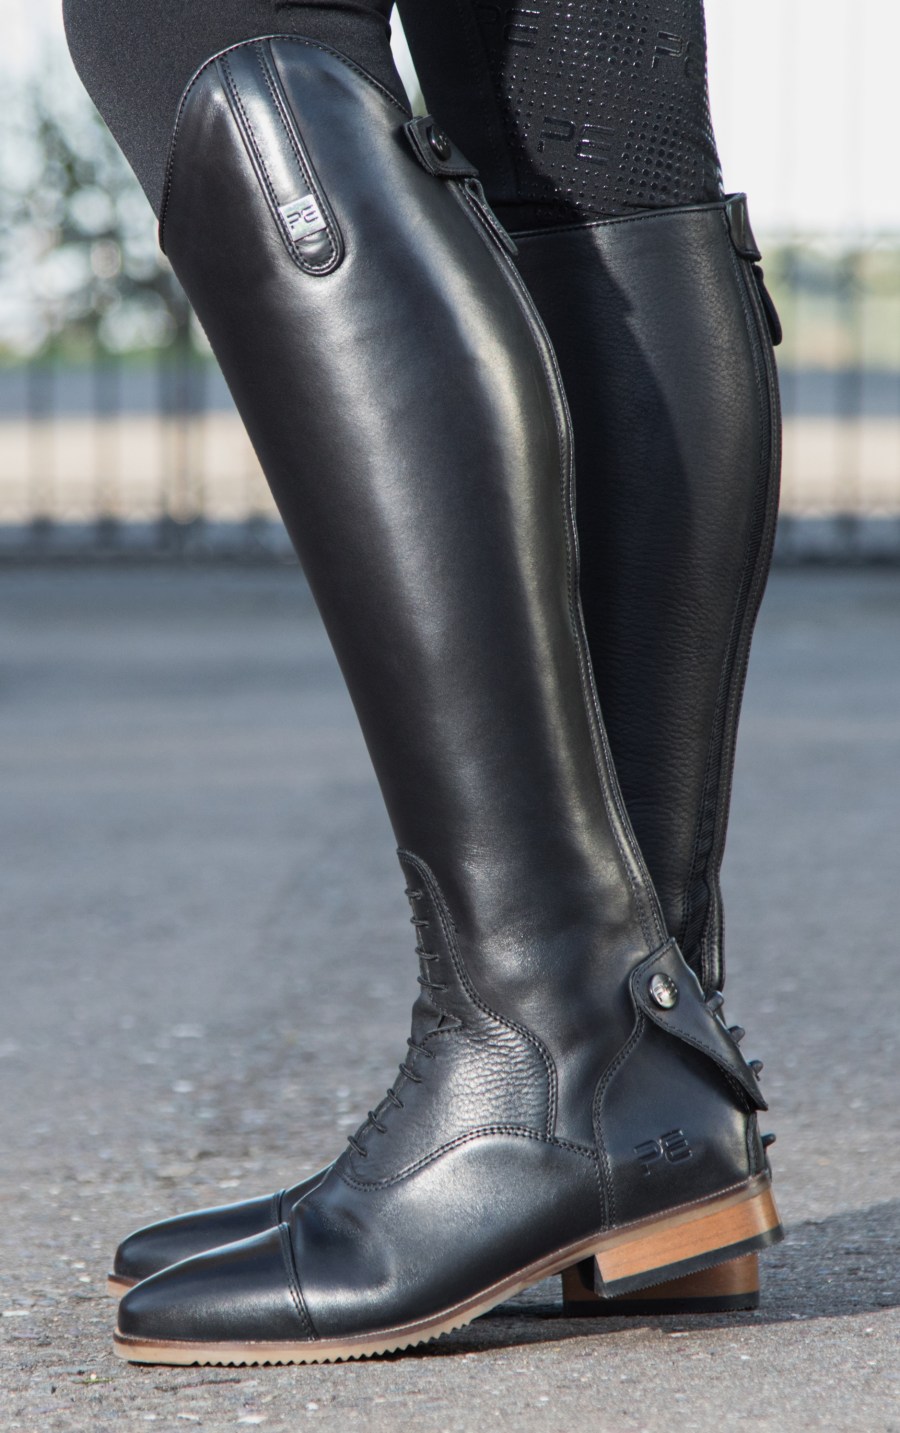 Confused about riding boots? Follow our tips to find the perfect pair ...